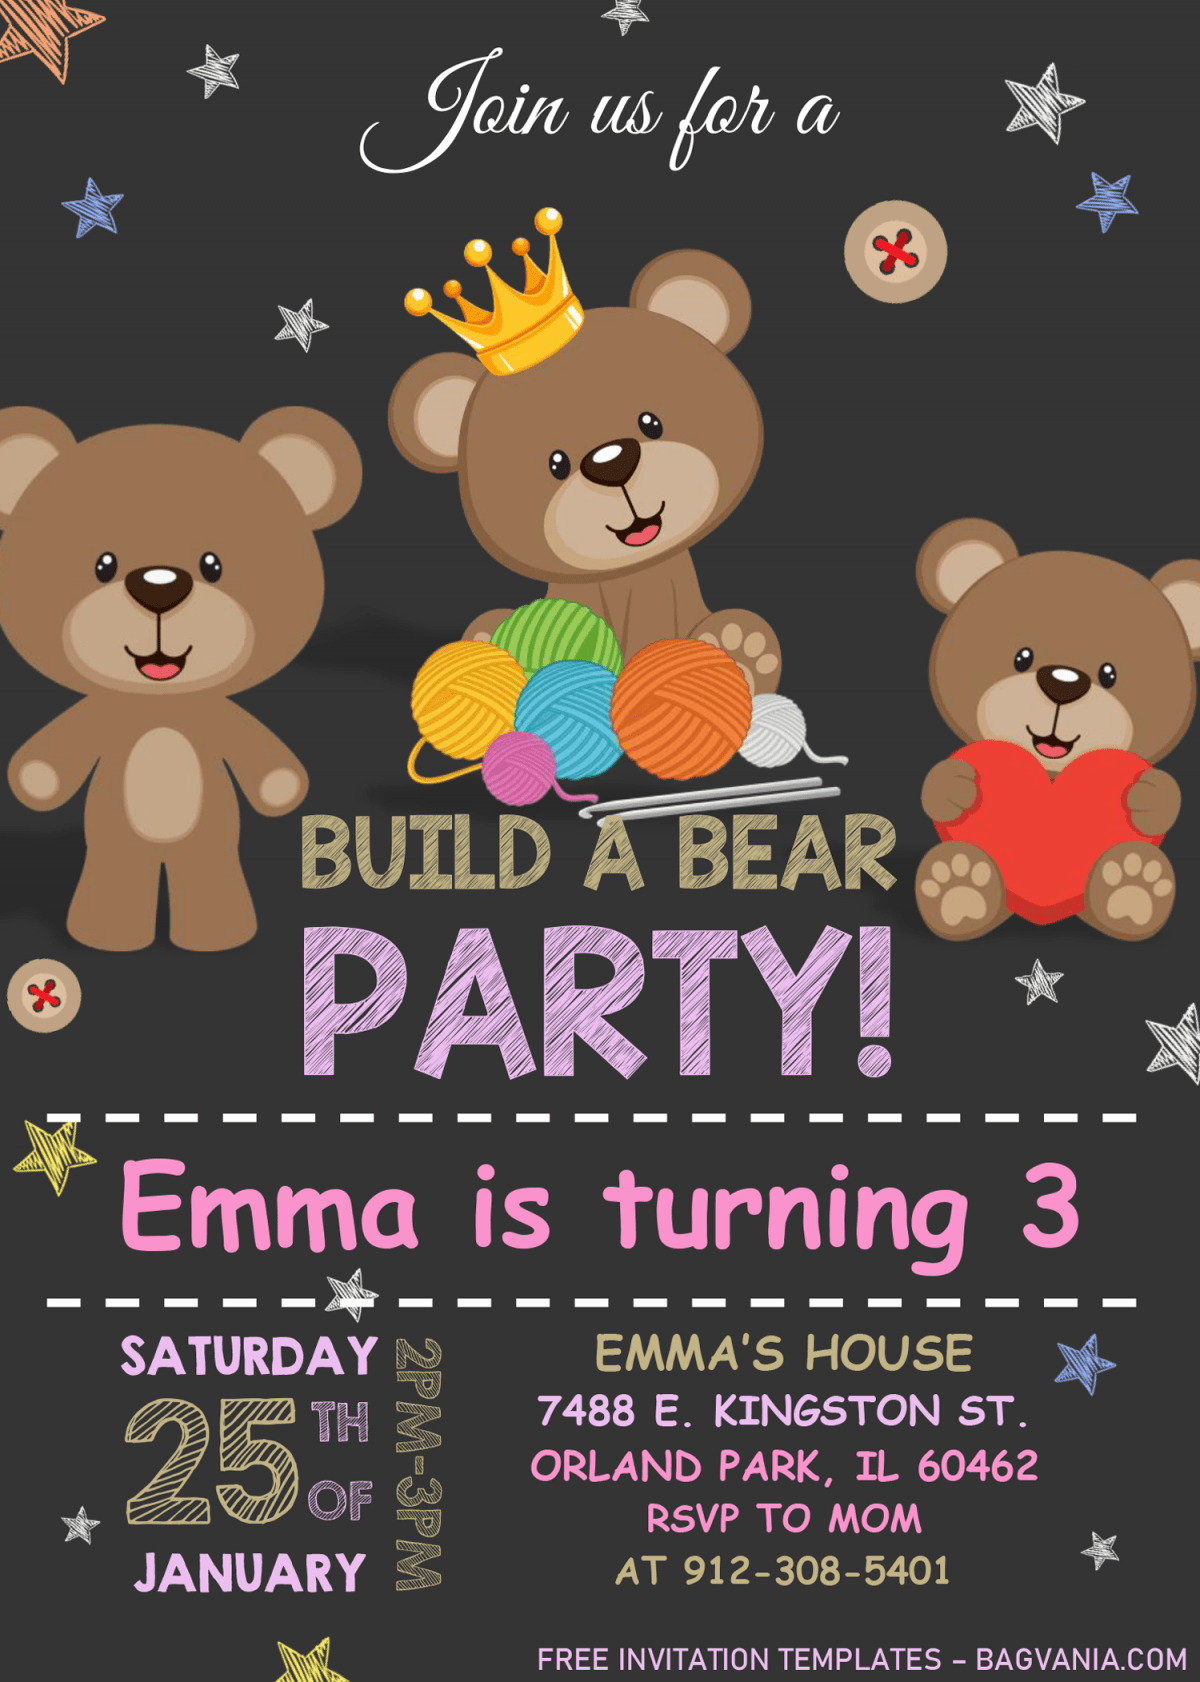 Build A Bear Birthday Invitation Templates - Editable With MS Word and has gold crowned bear